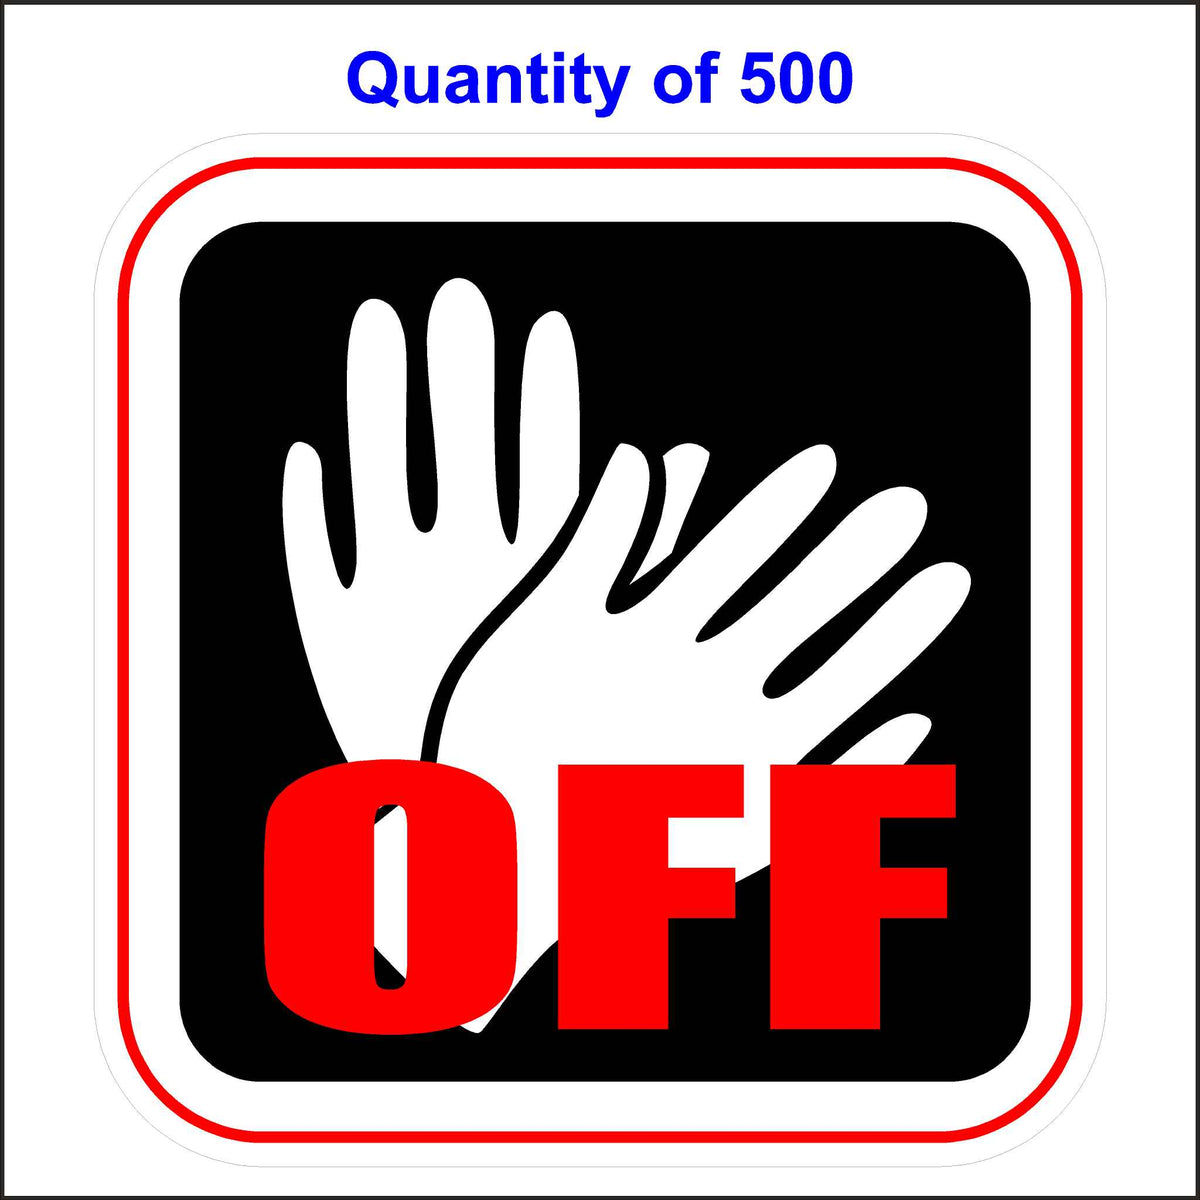 Hands off Sticker. This Sticker Has a Black Background With White Hands and the Word off Printed in Red. 500 Quantity.